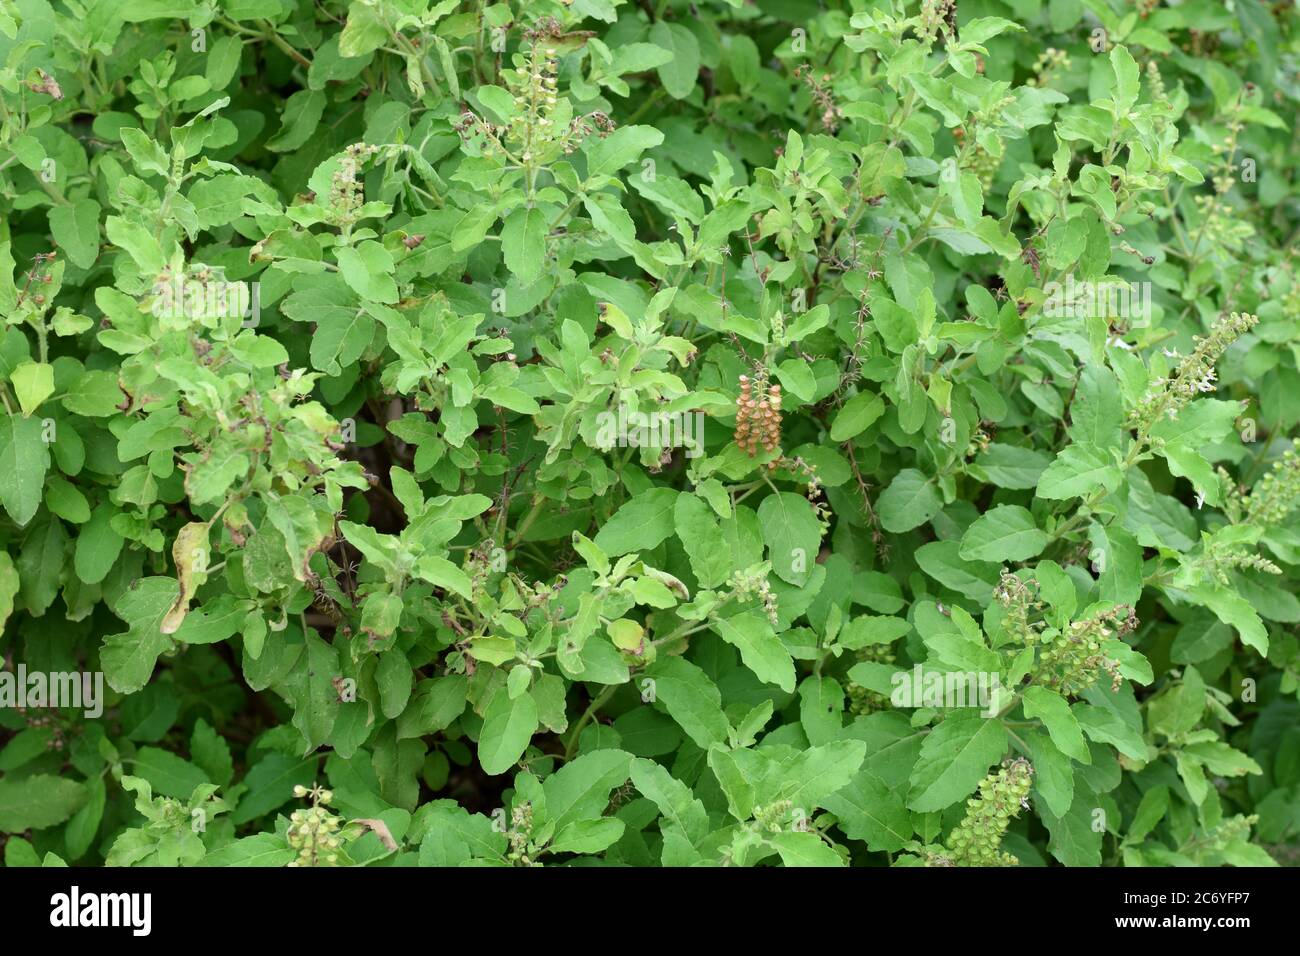 Basil tree leaves in nature, green leaf background Stock Photo